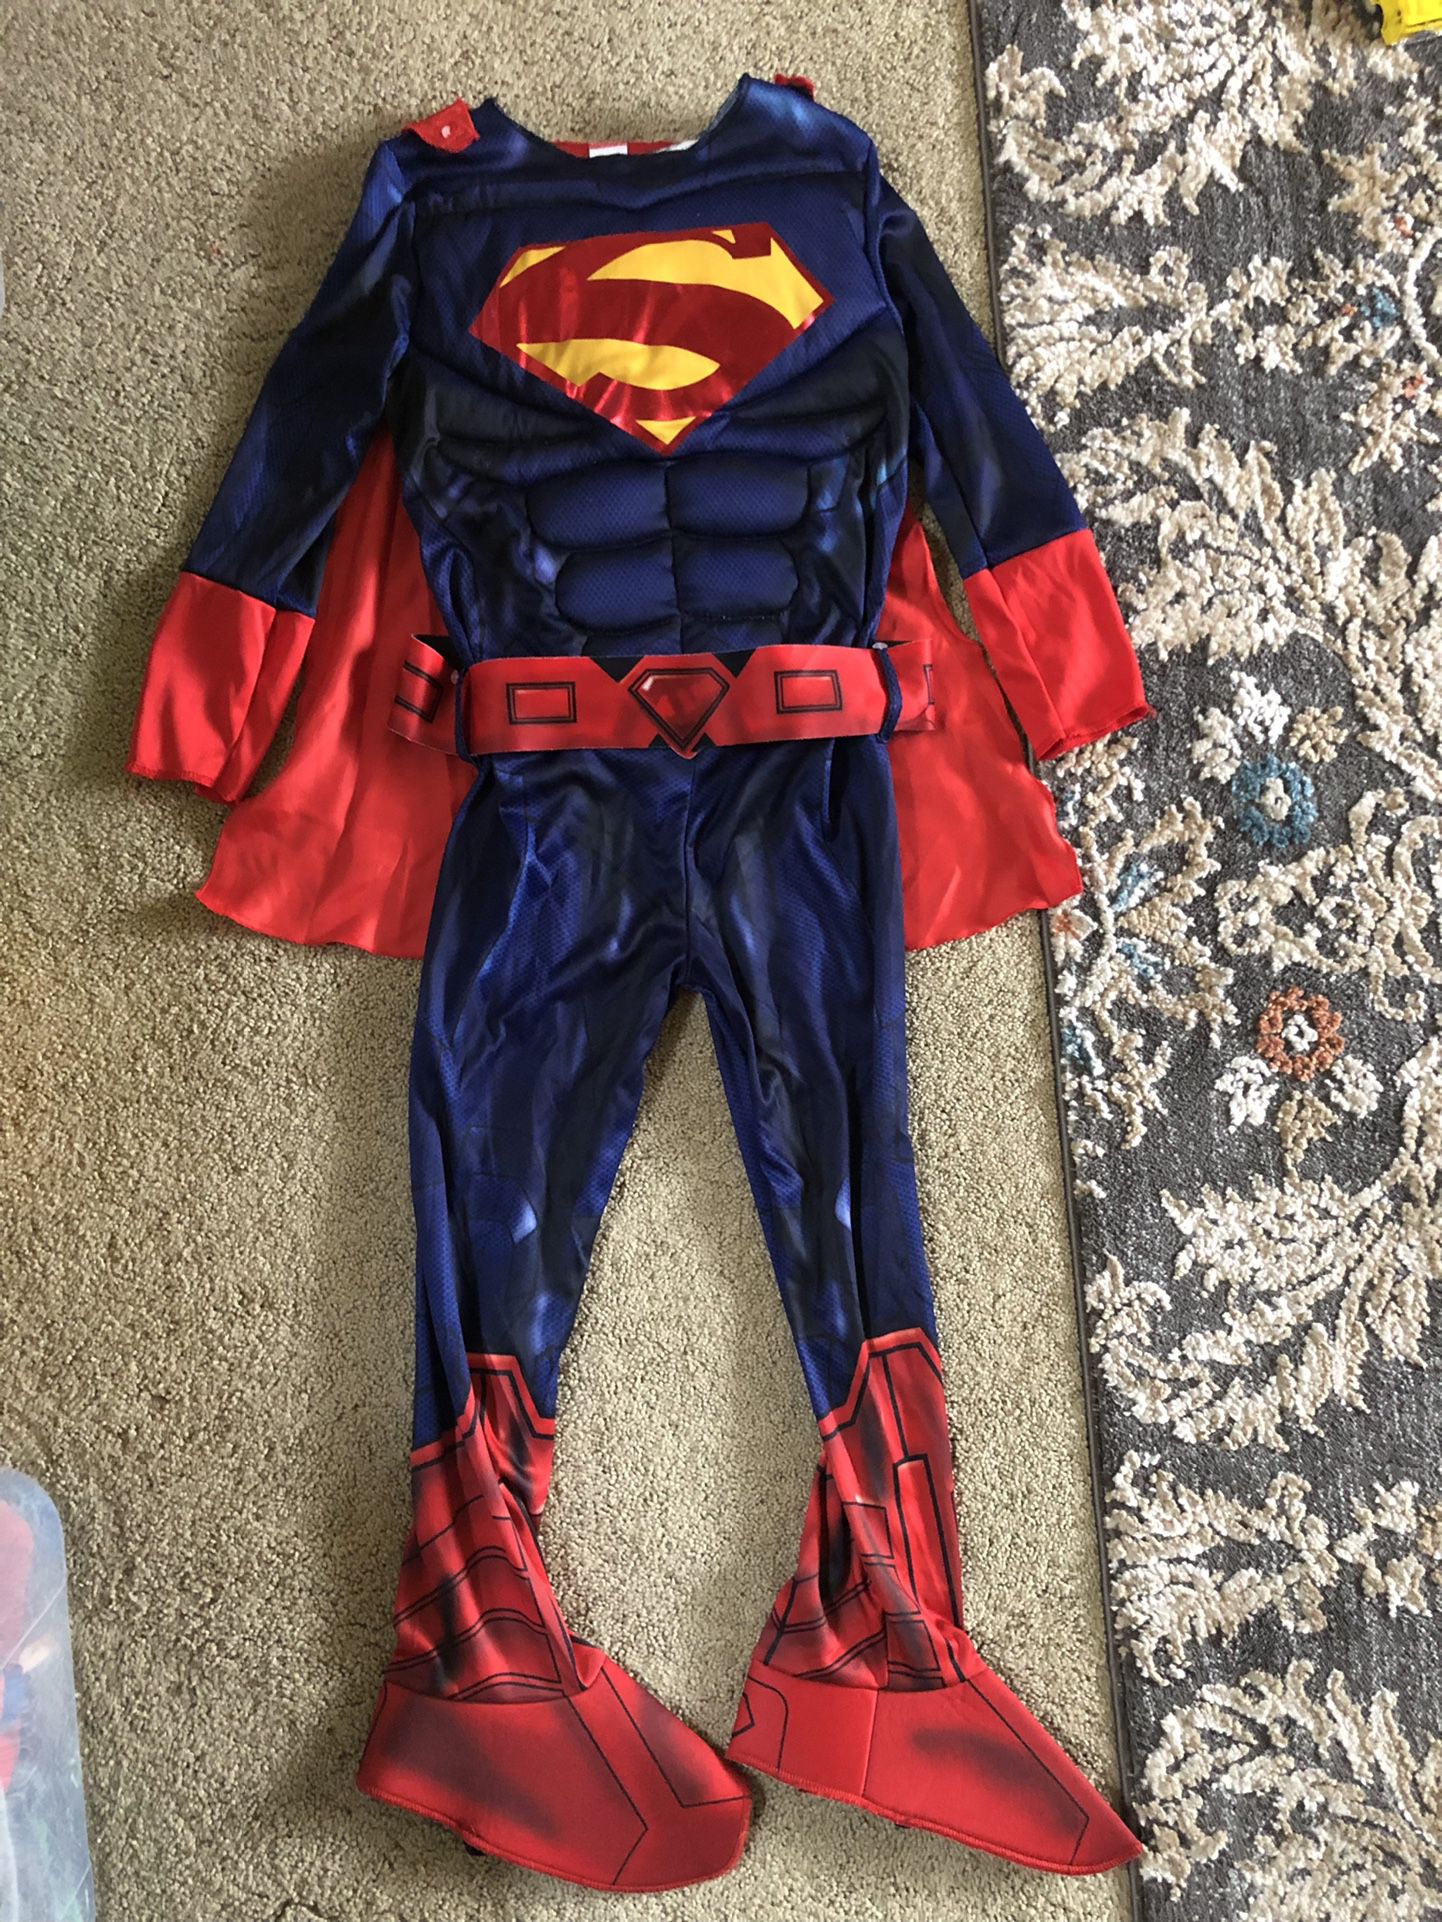 NEW WOT Superman Halloween Costume With Detachable Cape